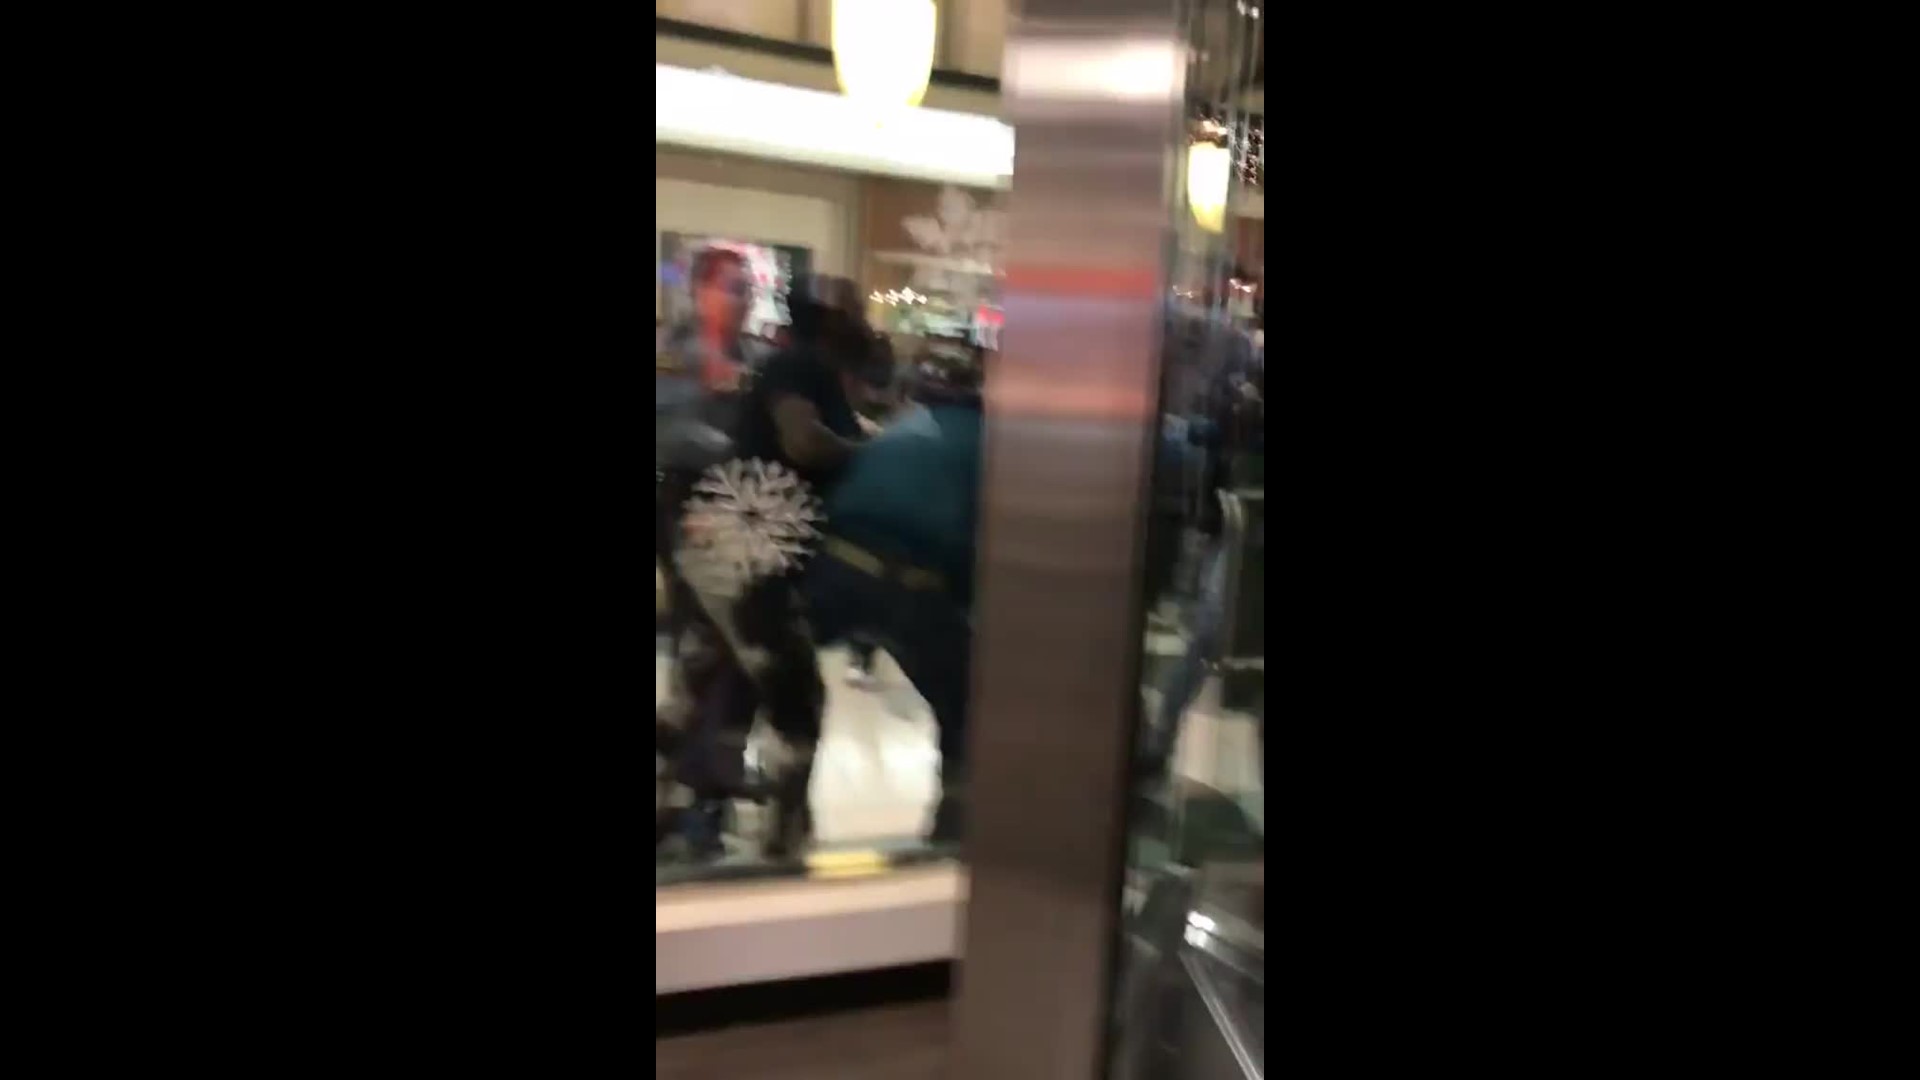 Raw video: Several fights involving hundreds of teens breaks out at Buckland Hills in Manchester